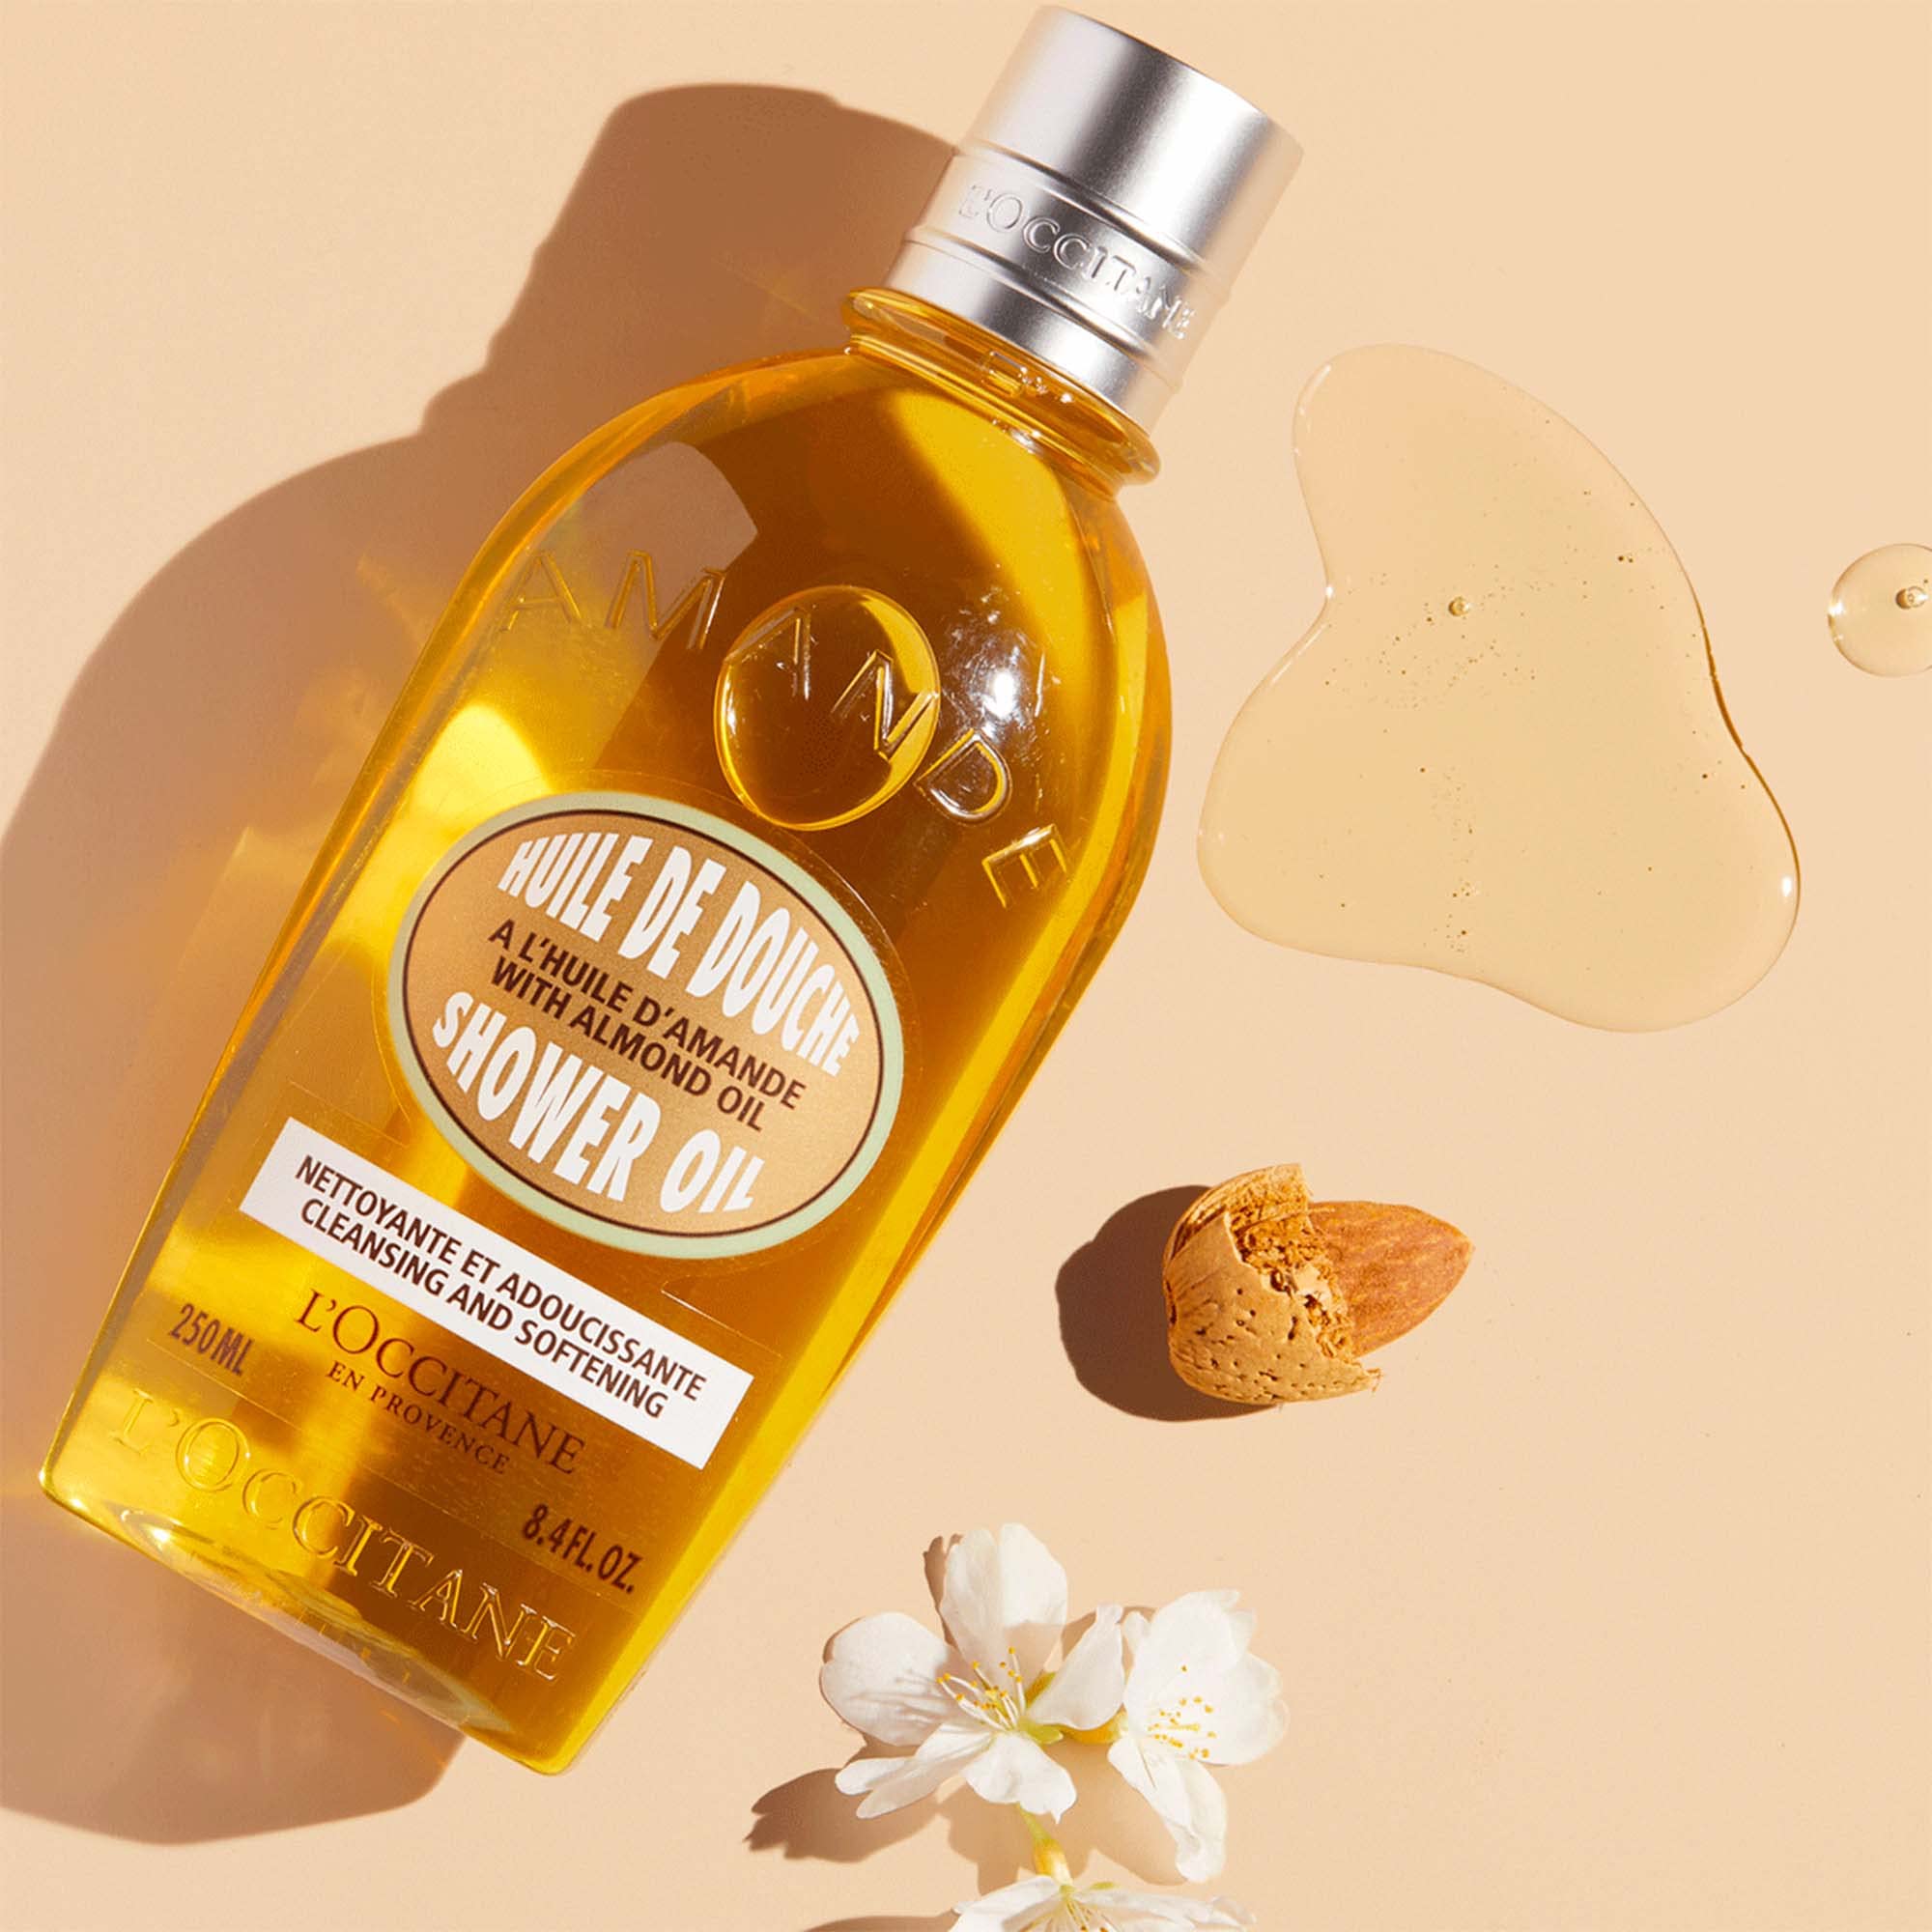 L'Occitane Cleansing & Softening Almond Shower Oil, Oil-to-Milky Lather, Softer Skin, Smooth Skin, Cleanse Without Drying, With Almond Oil